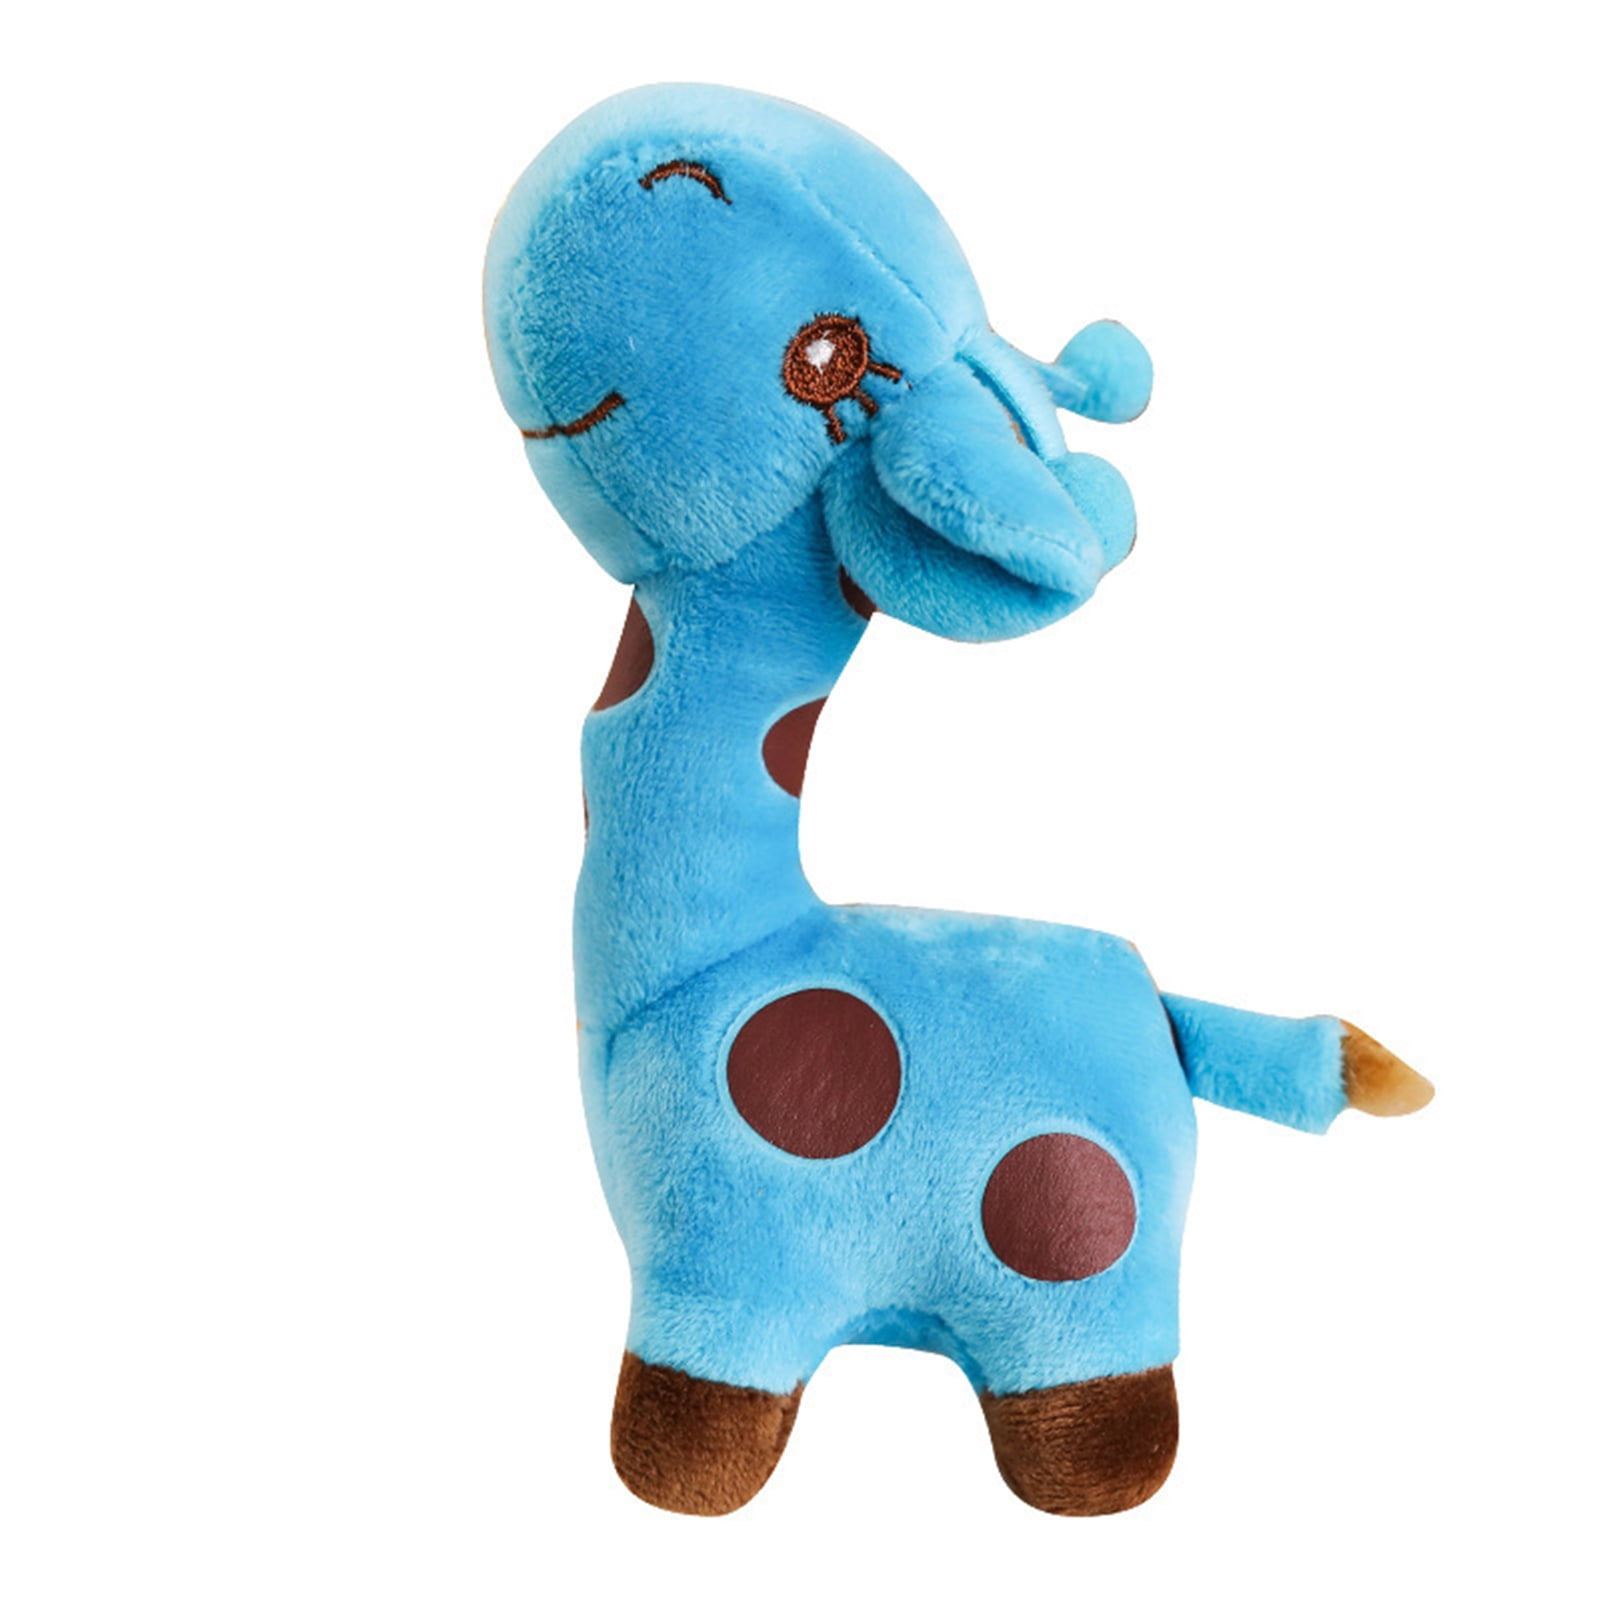 Giraffe standing Soft Toy Teddy Plush 18cm 7” Choose From 5 Colours 